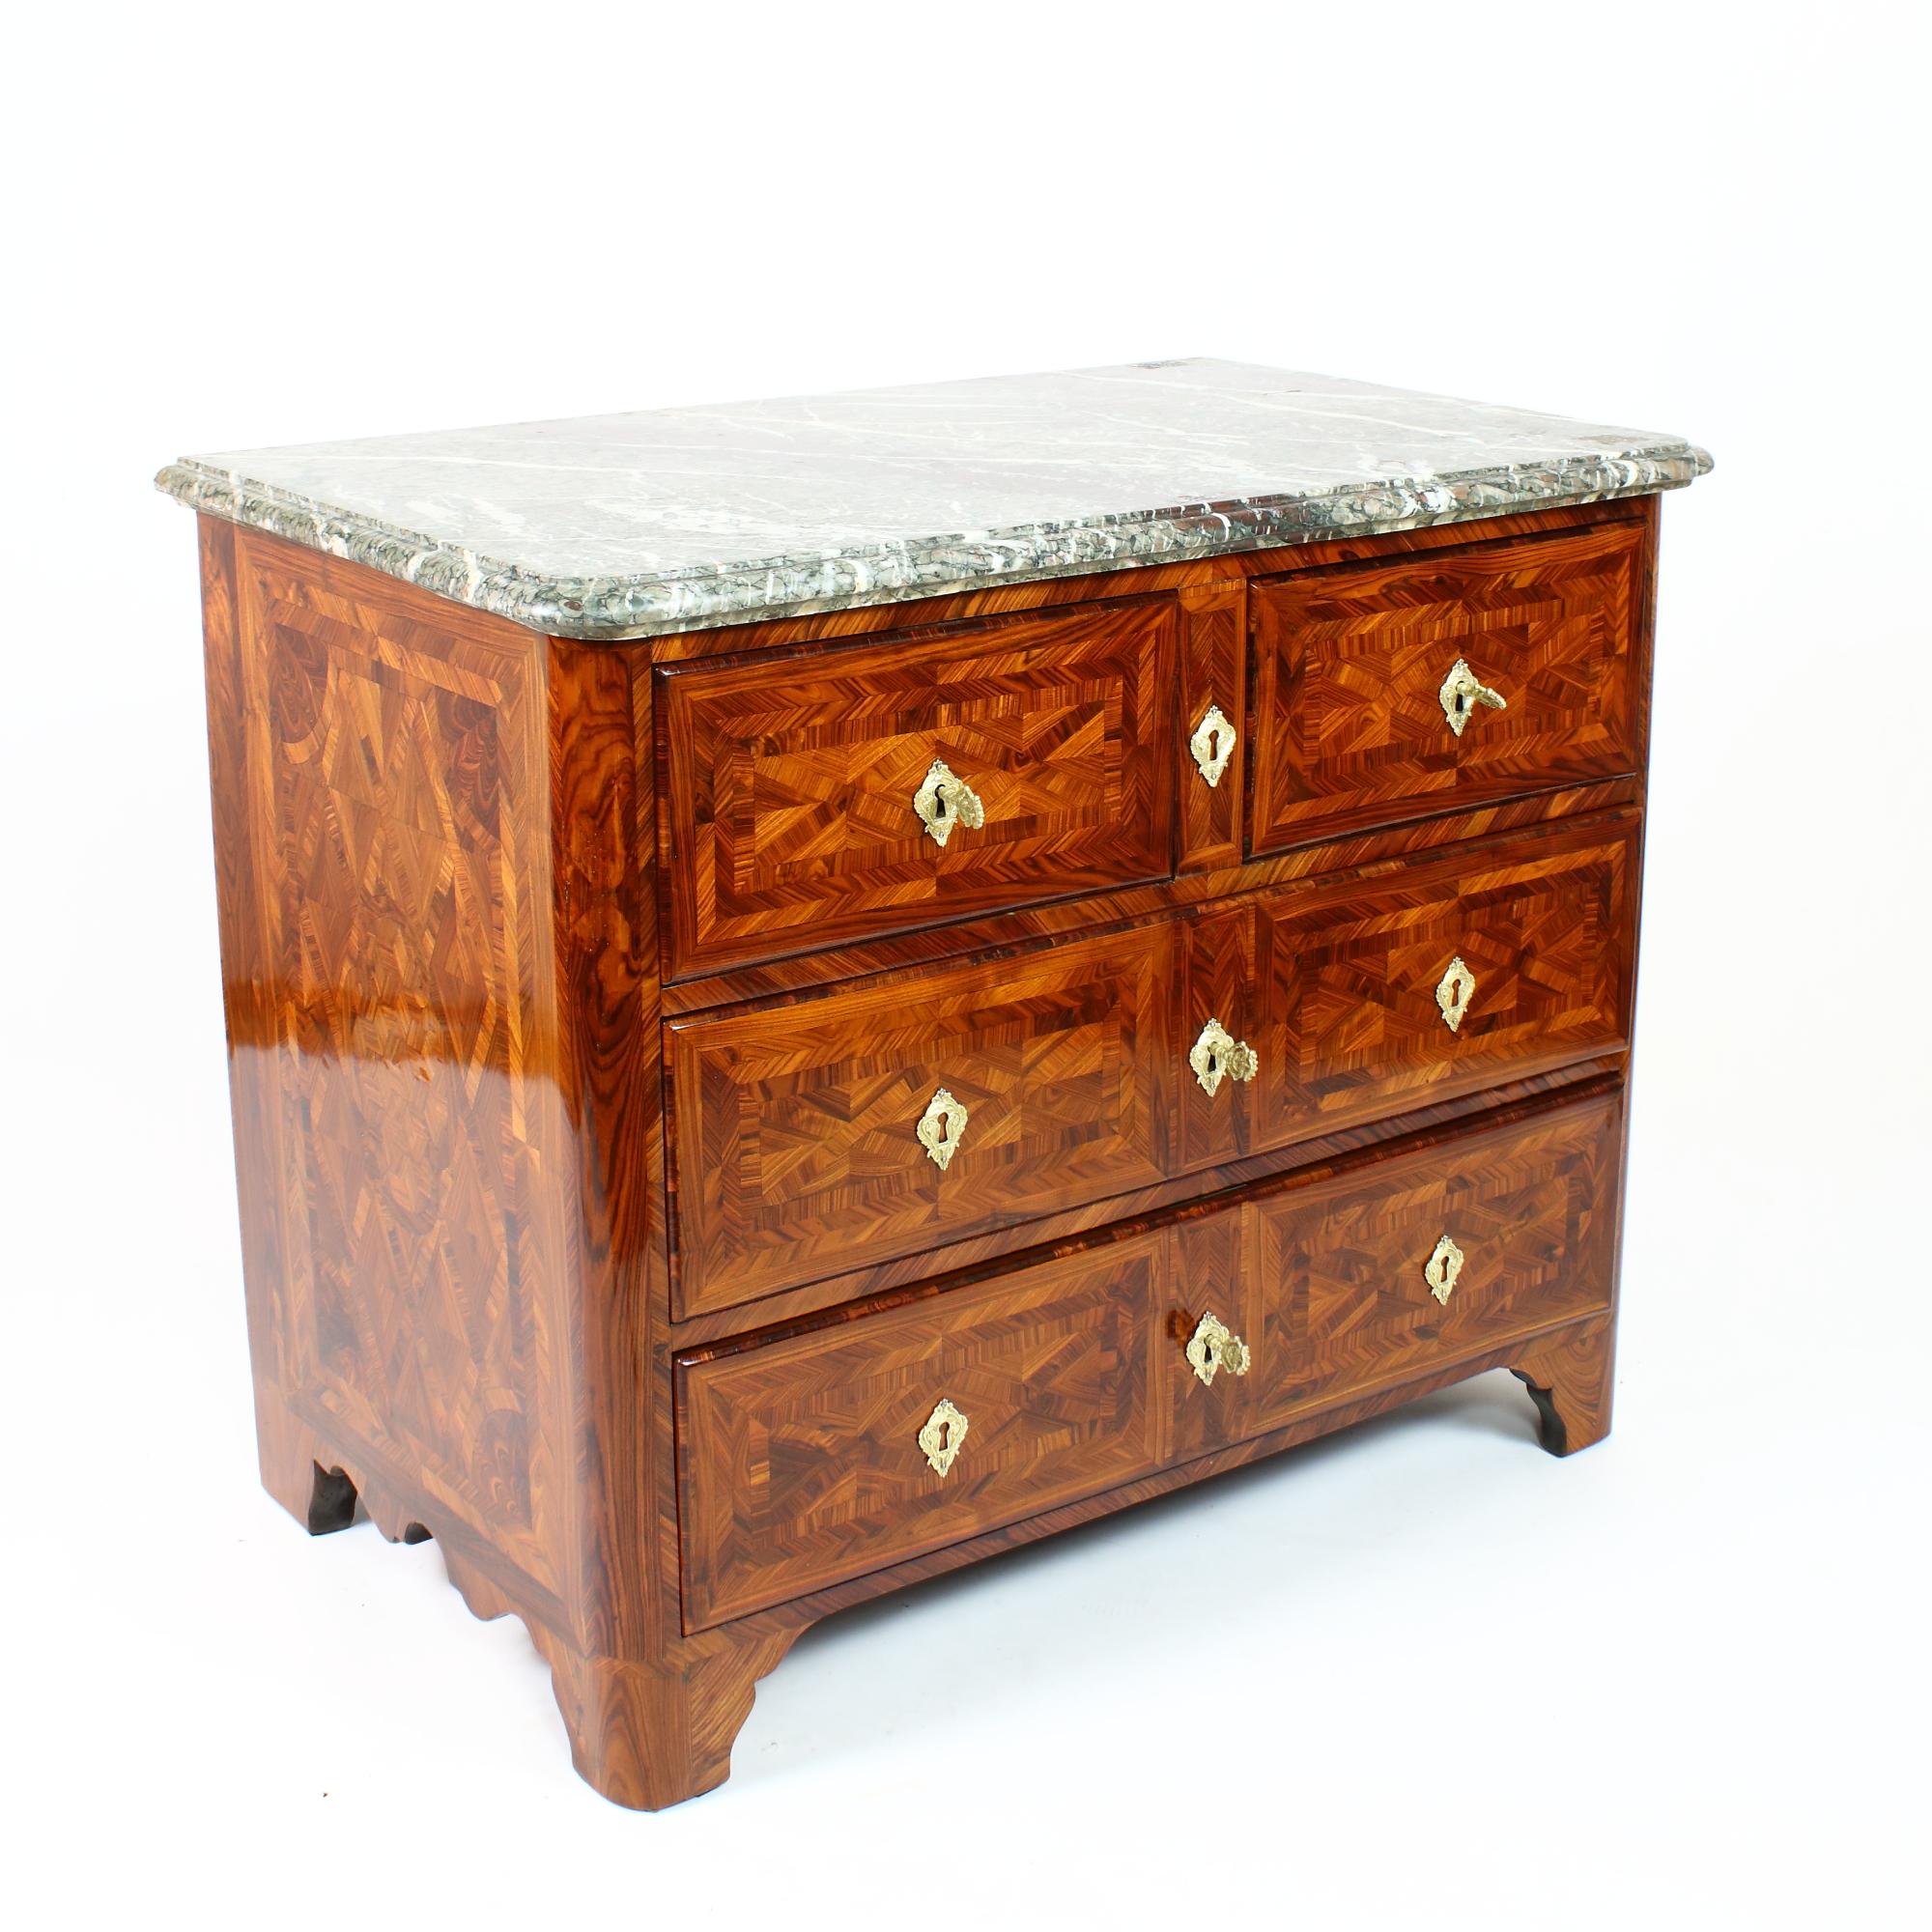 Bronze Early 18th Century French Louis XIV/Régence Period Trellis Marquetry Commode For Sale